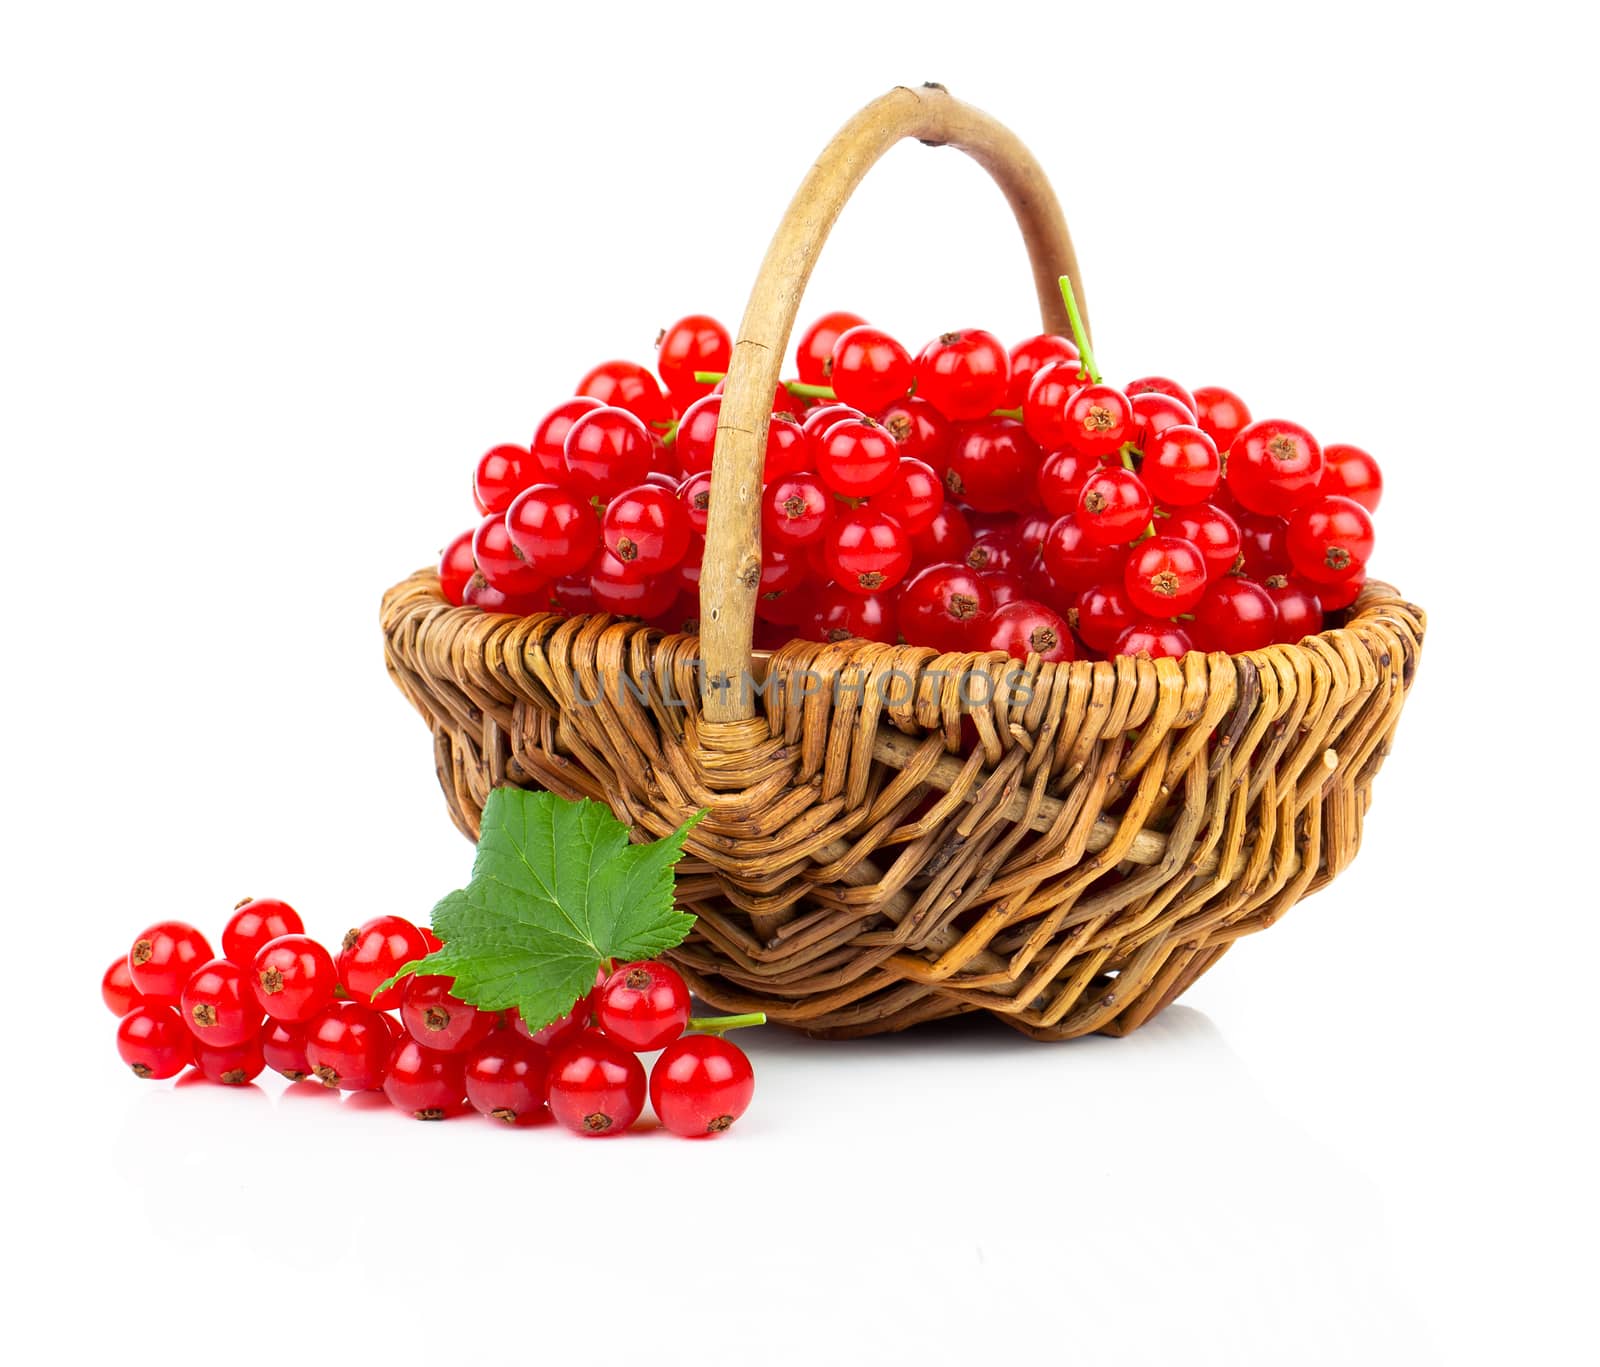 Basket full of red currant on a white background